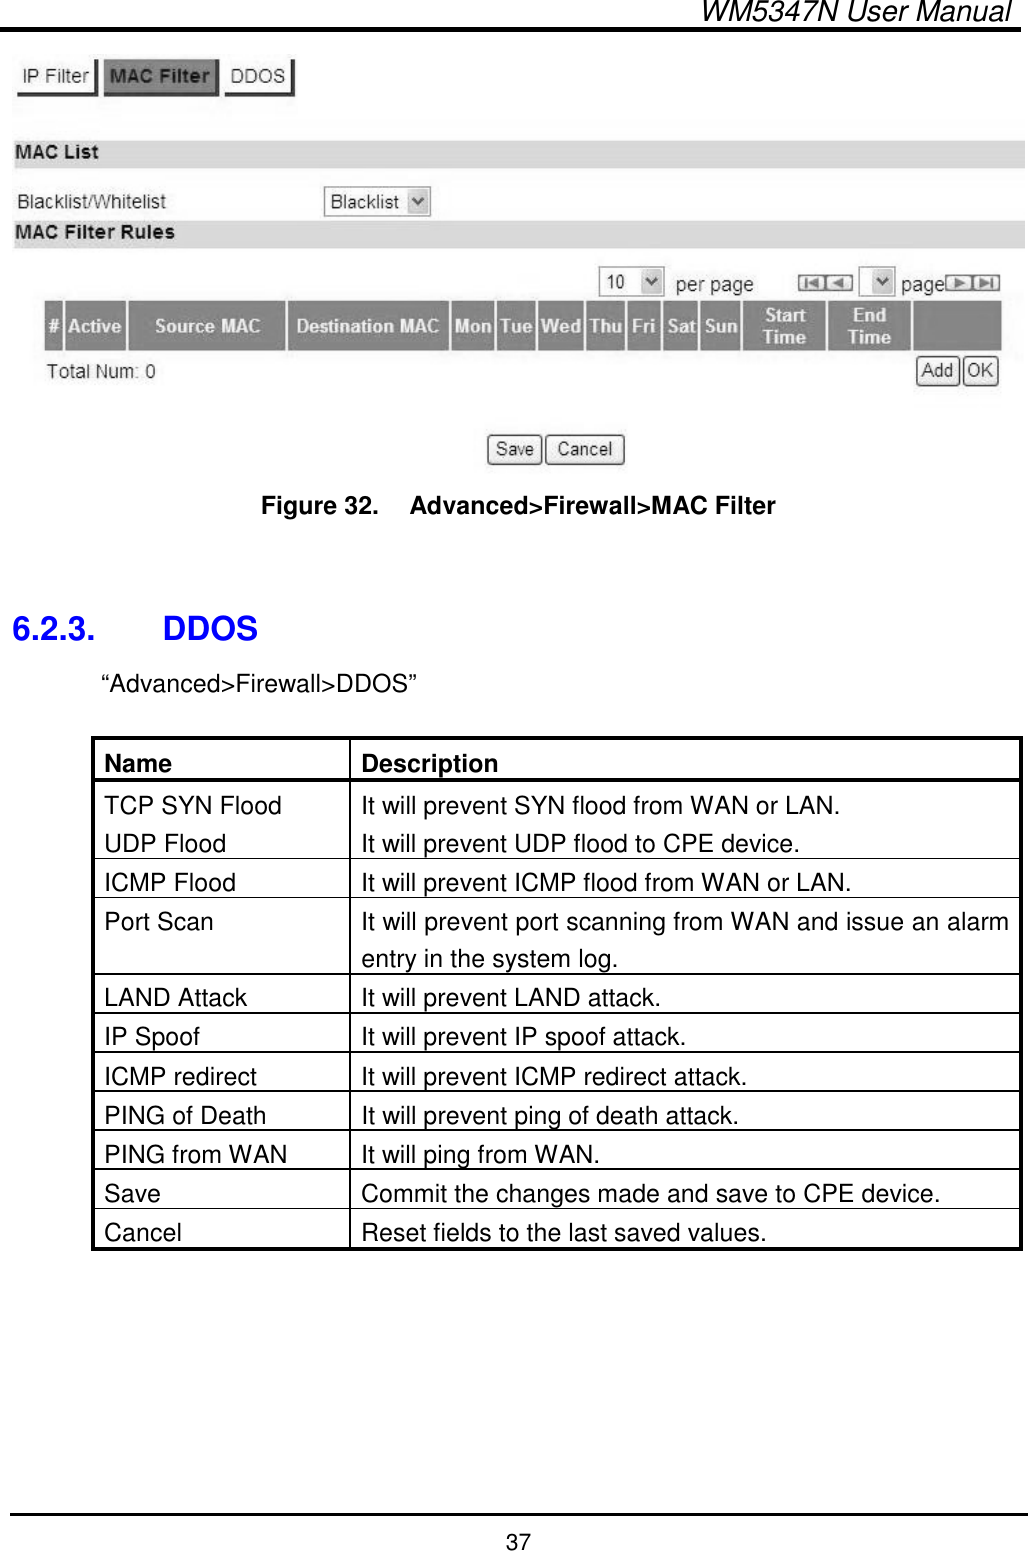  WM5347N User Manual  37  Figure 32.   Advanced&gt;Firewall&gt;MAC Filter   6.2.3.  DDOS “Advanced&gt;Firewall&gt;DDOS”  Name  Description TCP SYN Flood  It will prevent SYN flood from WAN or LAN. UDP Flood  It will prevent UDP flood to CPE device. ICMP Flood  It will prevent ICMP flood from WAN or LAN. Port Scan  It will prevent port scanning from WAN and issue an alarm entry in the system log. LAND Attack  It will prevent LAND attack. IP Spoof  It will prevent IP spoof attack. ICMP redirect  It will prevent ICMP redirect attack. PING of Death  It will prevent ping of death attack. PING from WAN  It will ping from WAN. Save  Commit the changes made and save to CPE device. Cancel  Reset fields to the last saved values.  